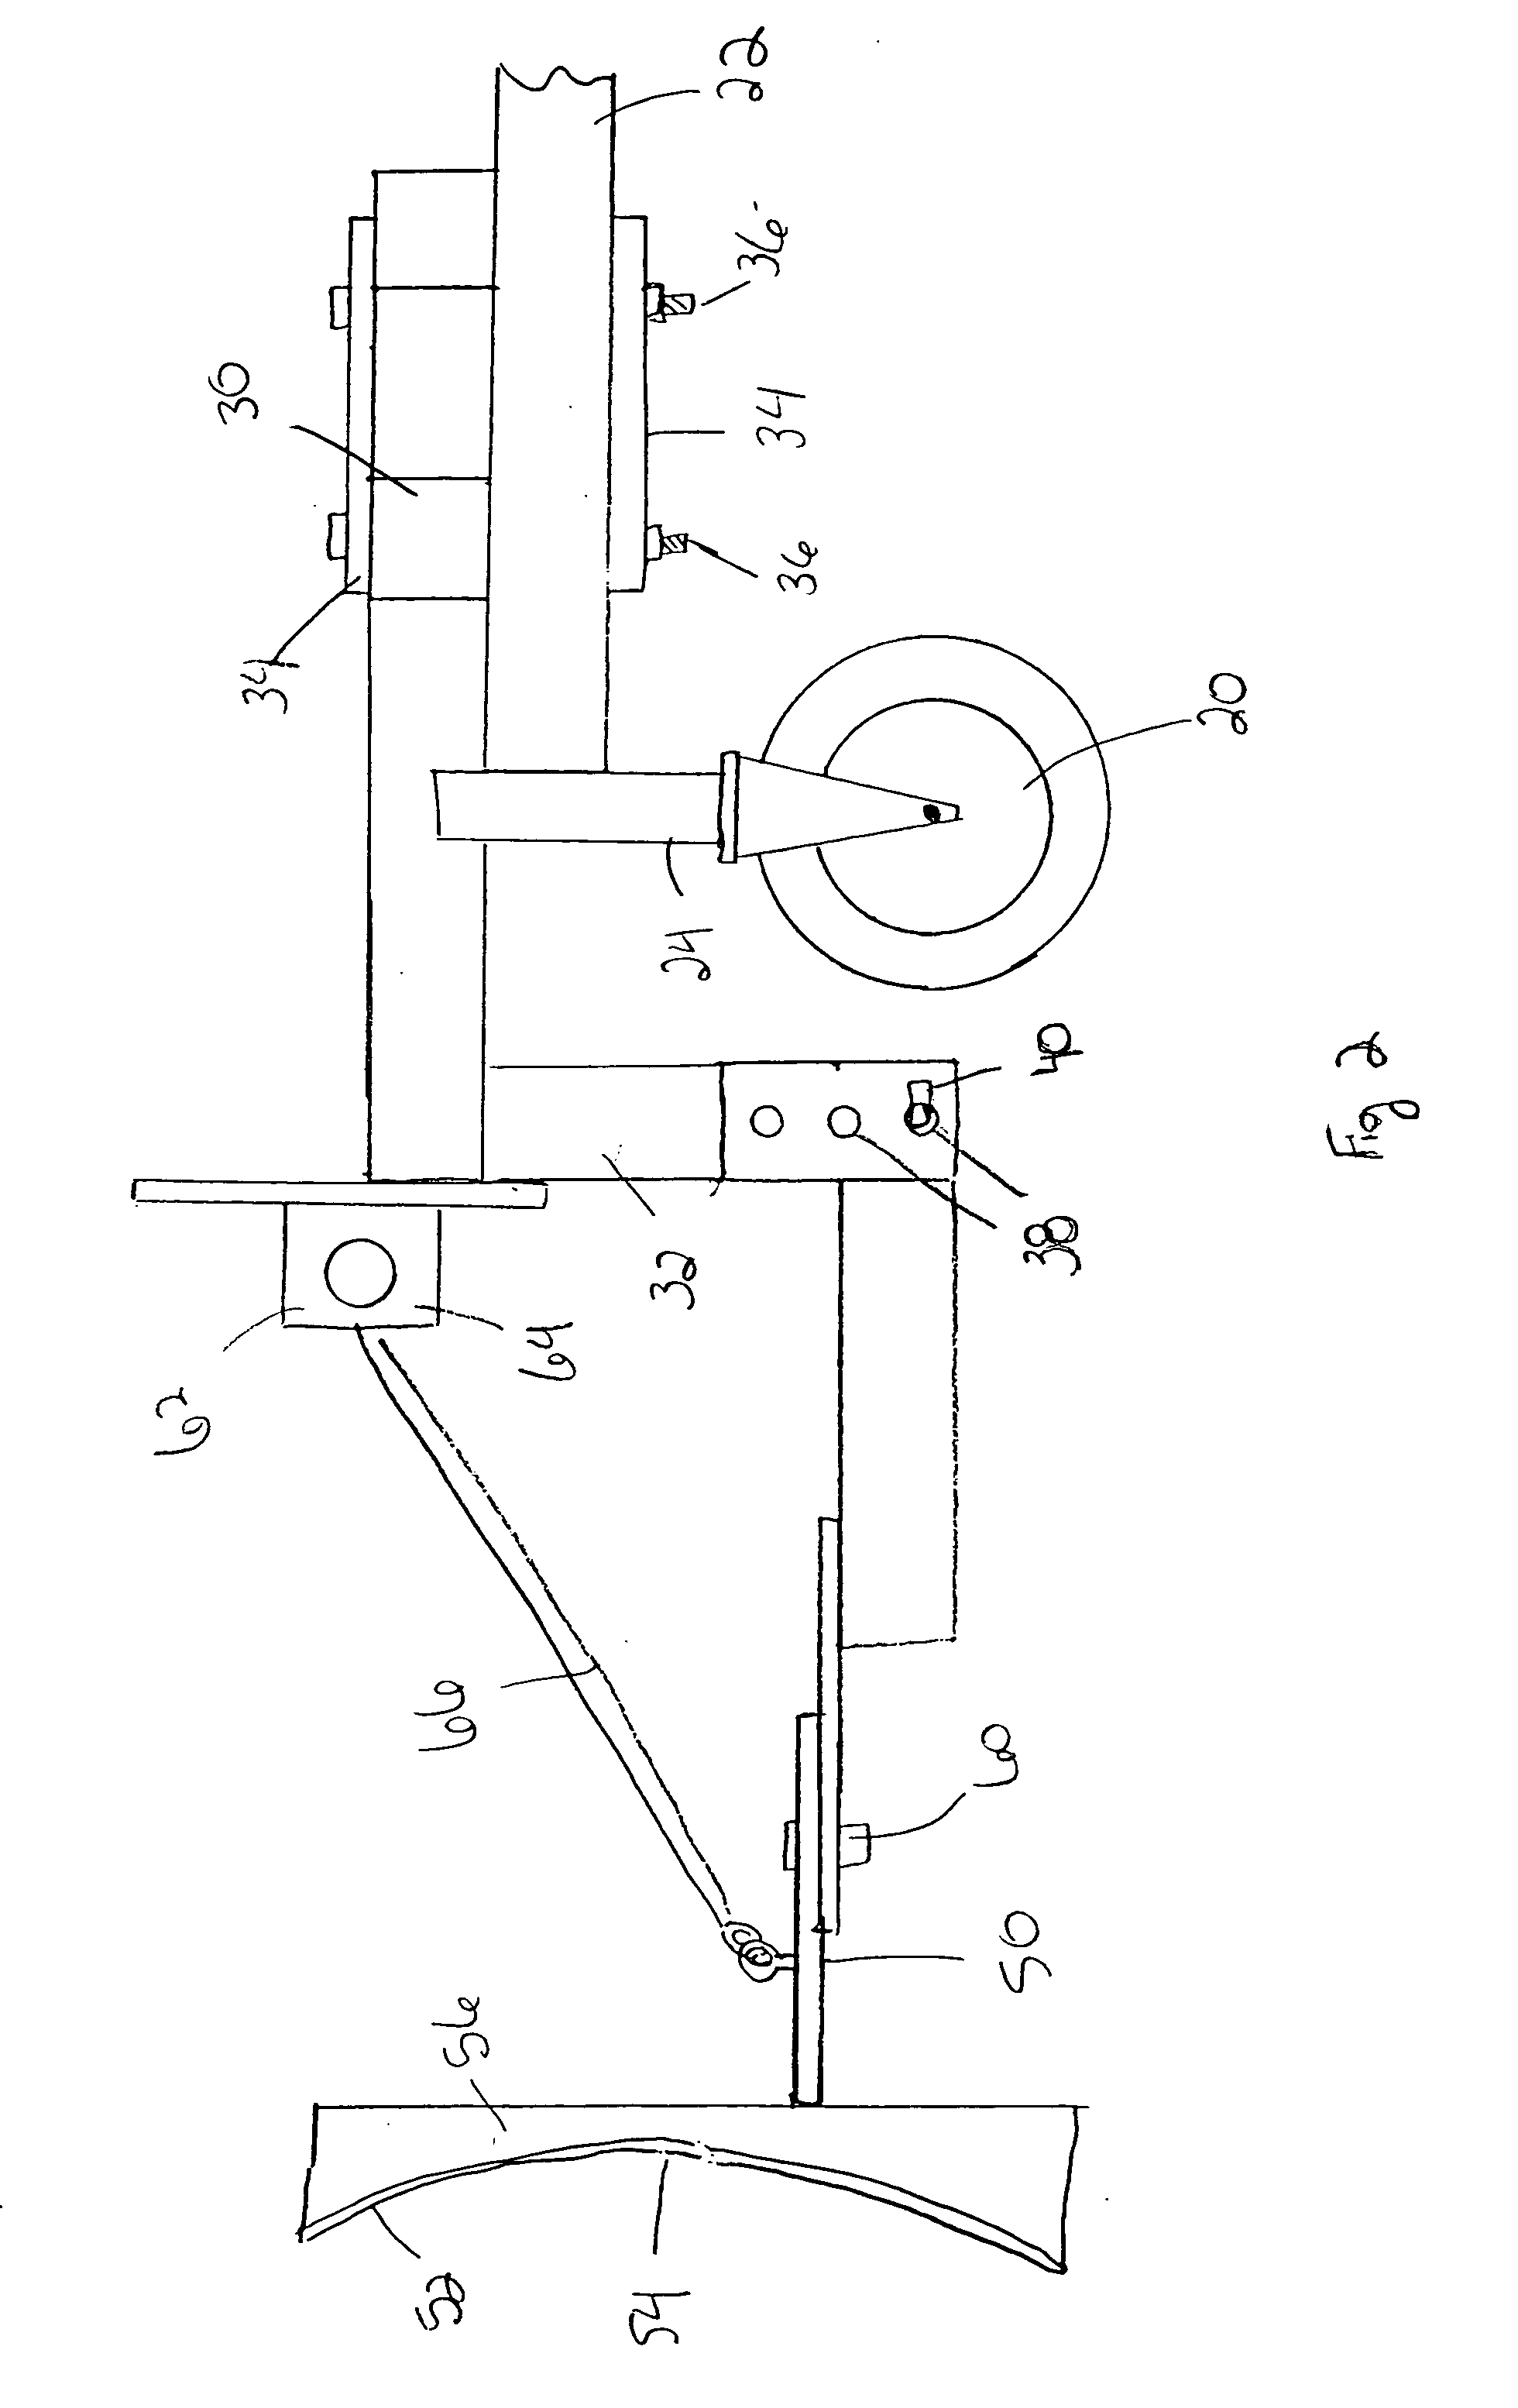 Snow plow and attachment system for zero turning radius mower